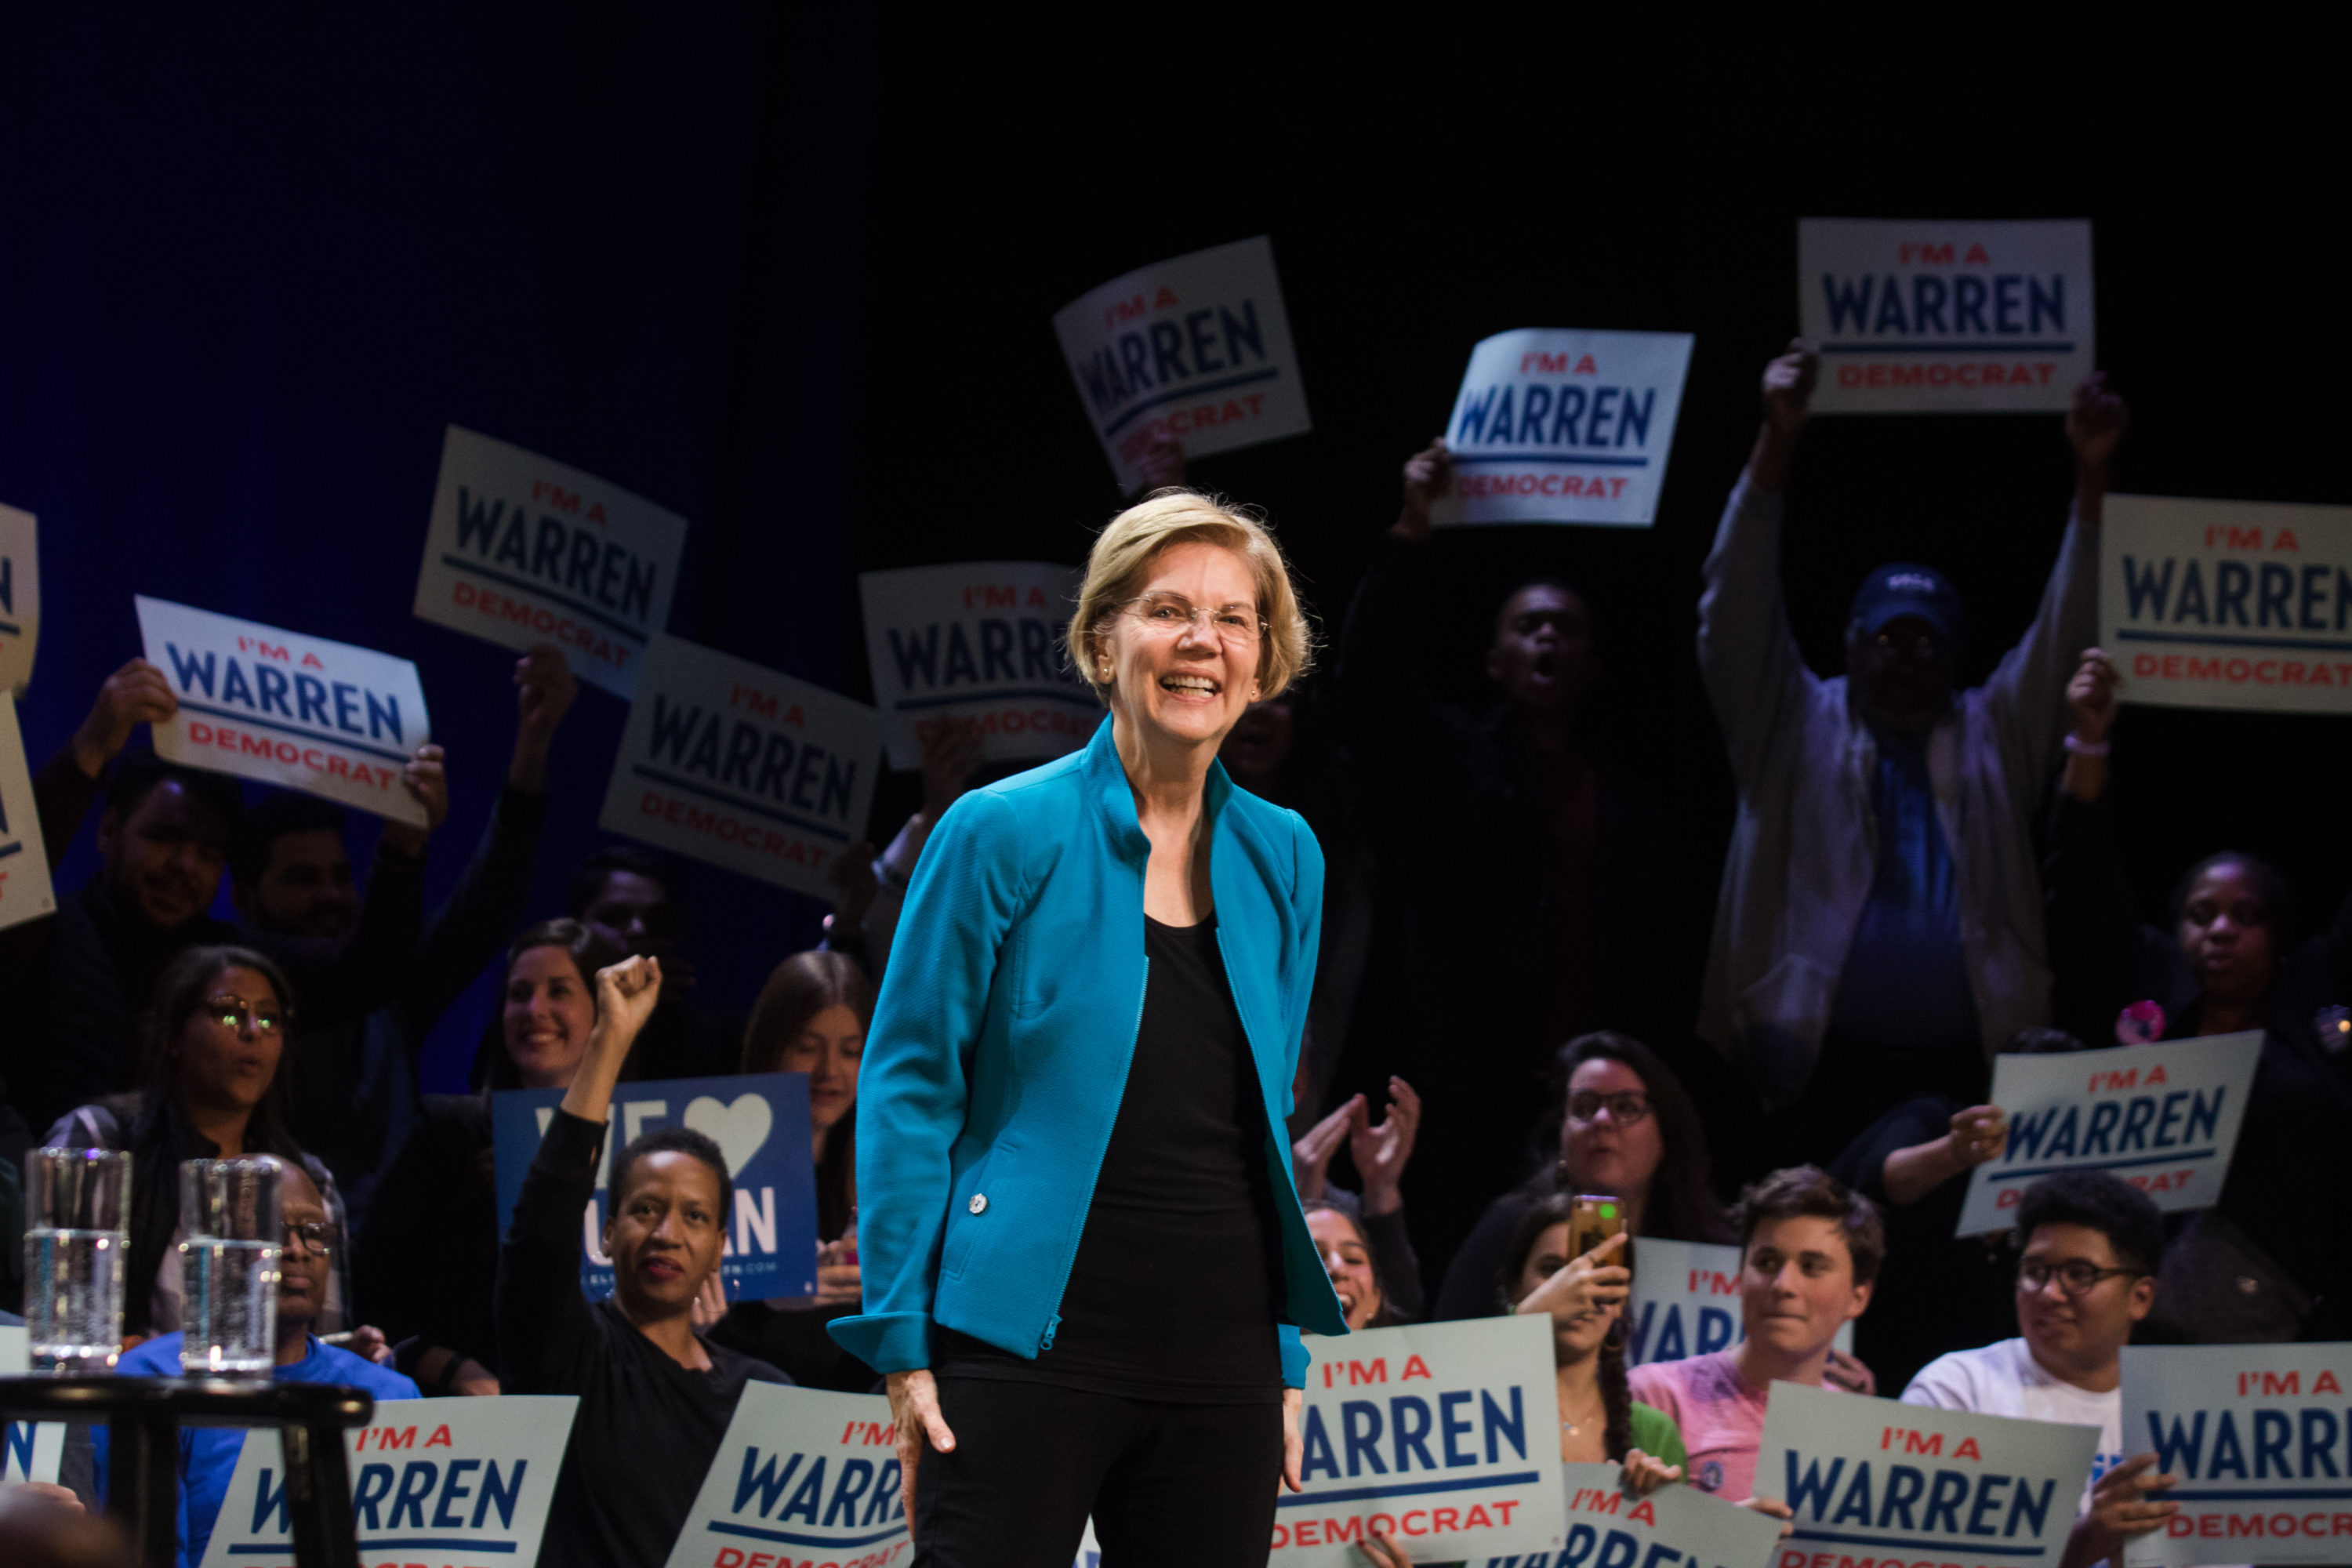 Democratic presidential candidate Elizabeth Warren spoke to a crowd of about 3,000 people at the Kings Theatre on Flatbush Avenue. Photo: Paul Frangipane/Brooklyn Eagle